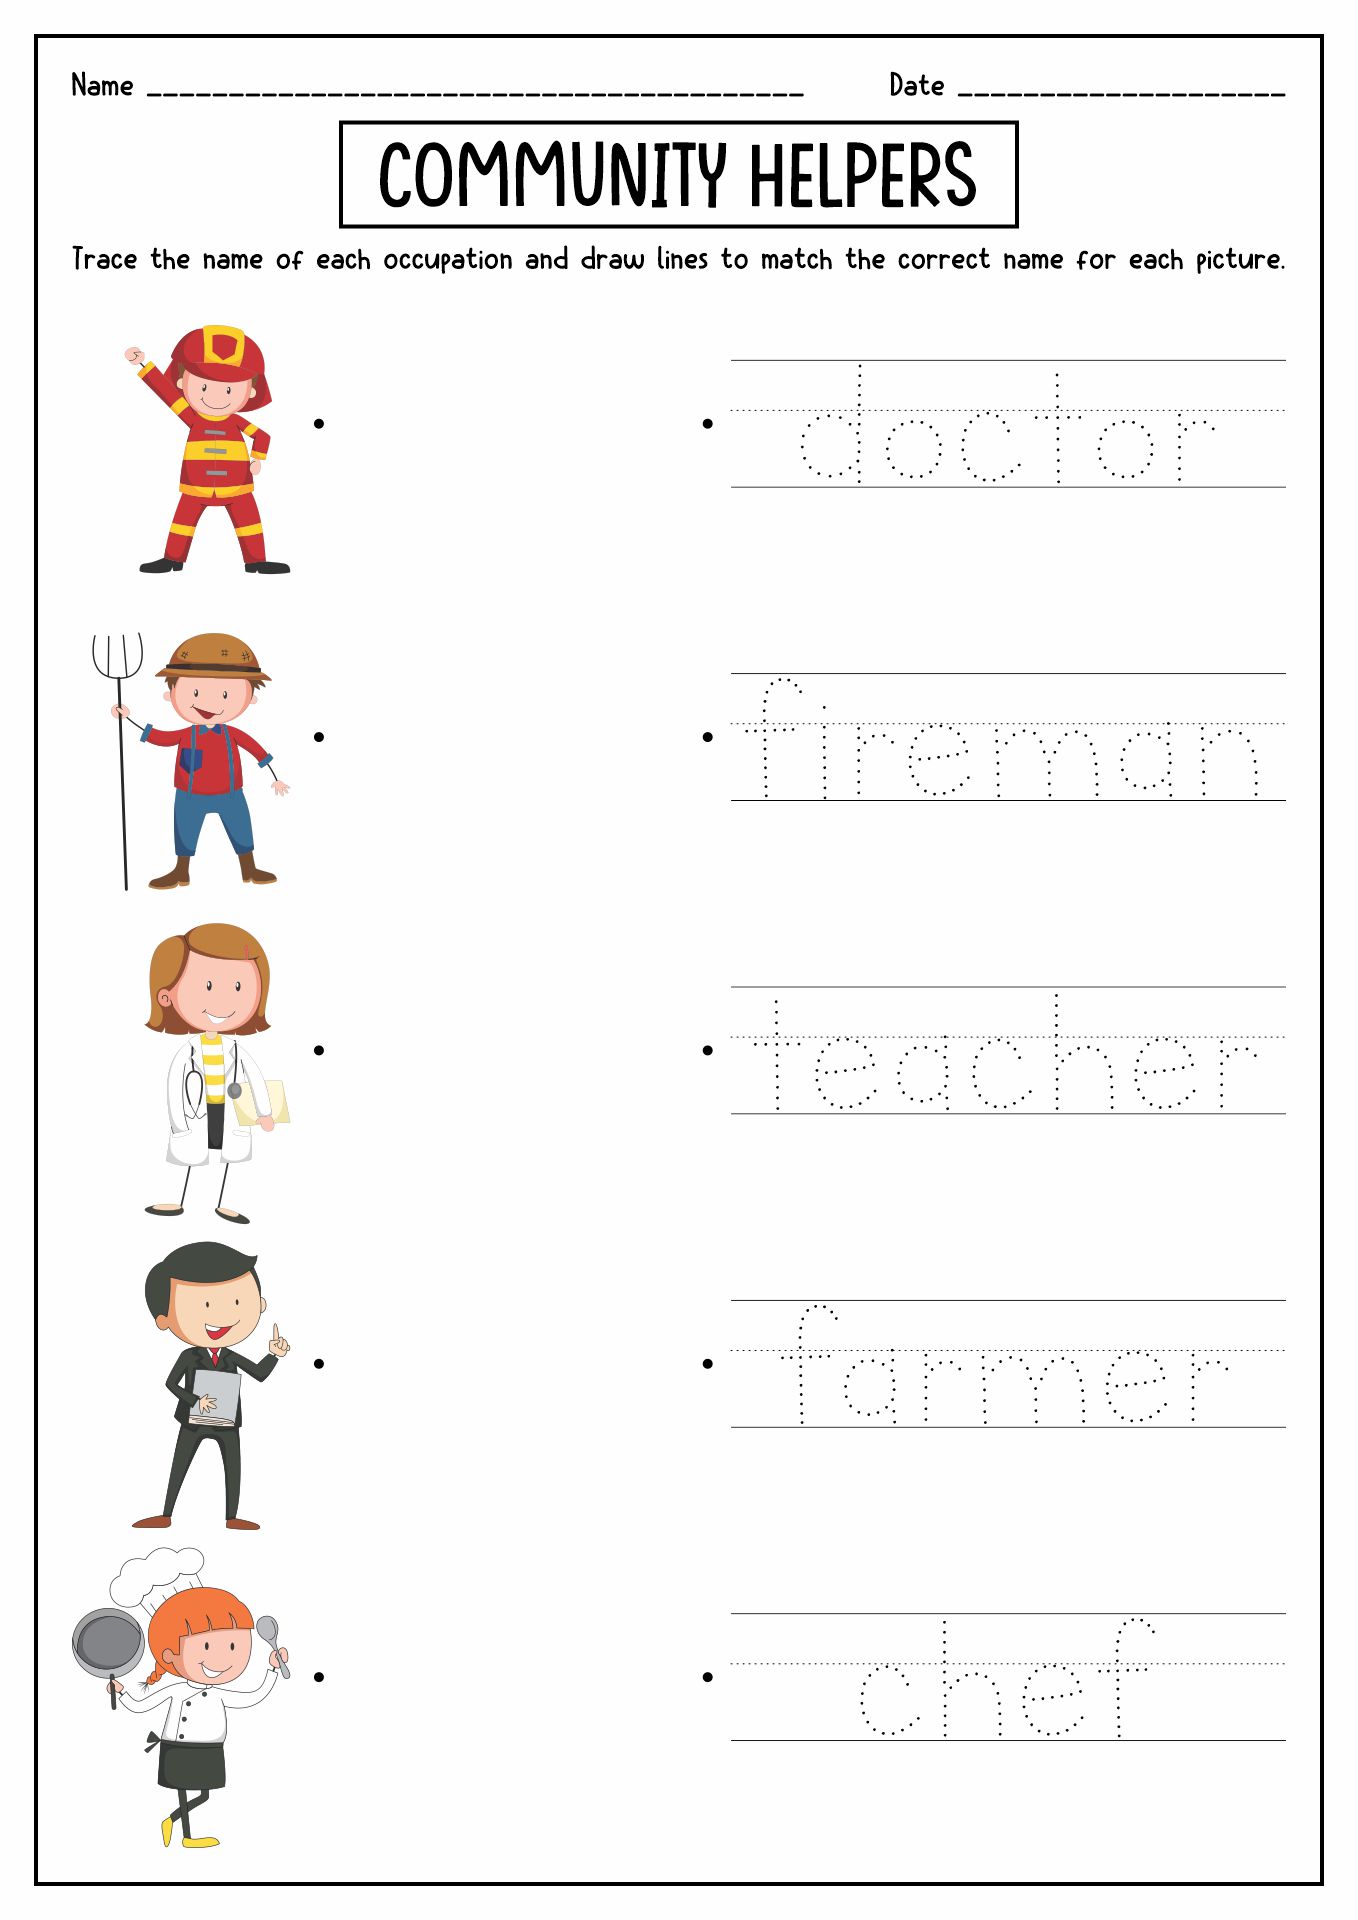 Memory Community Helpers Free to Printable Coloring Pages That are